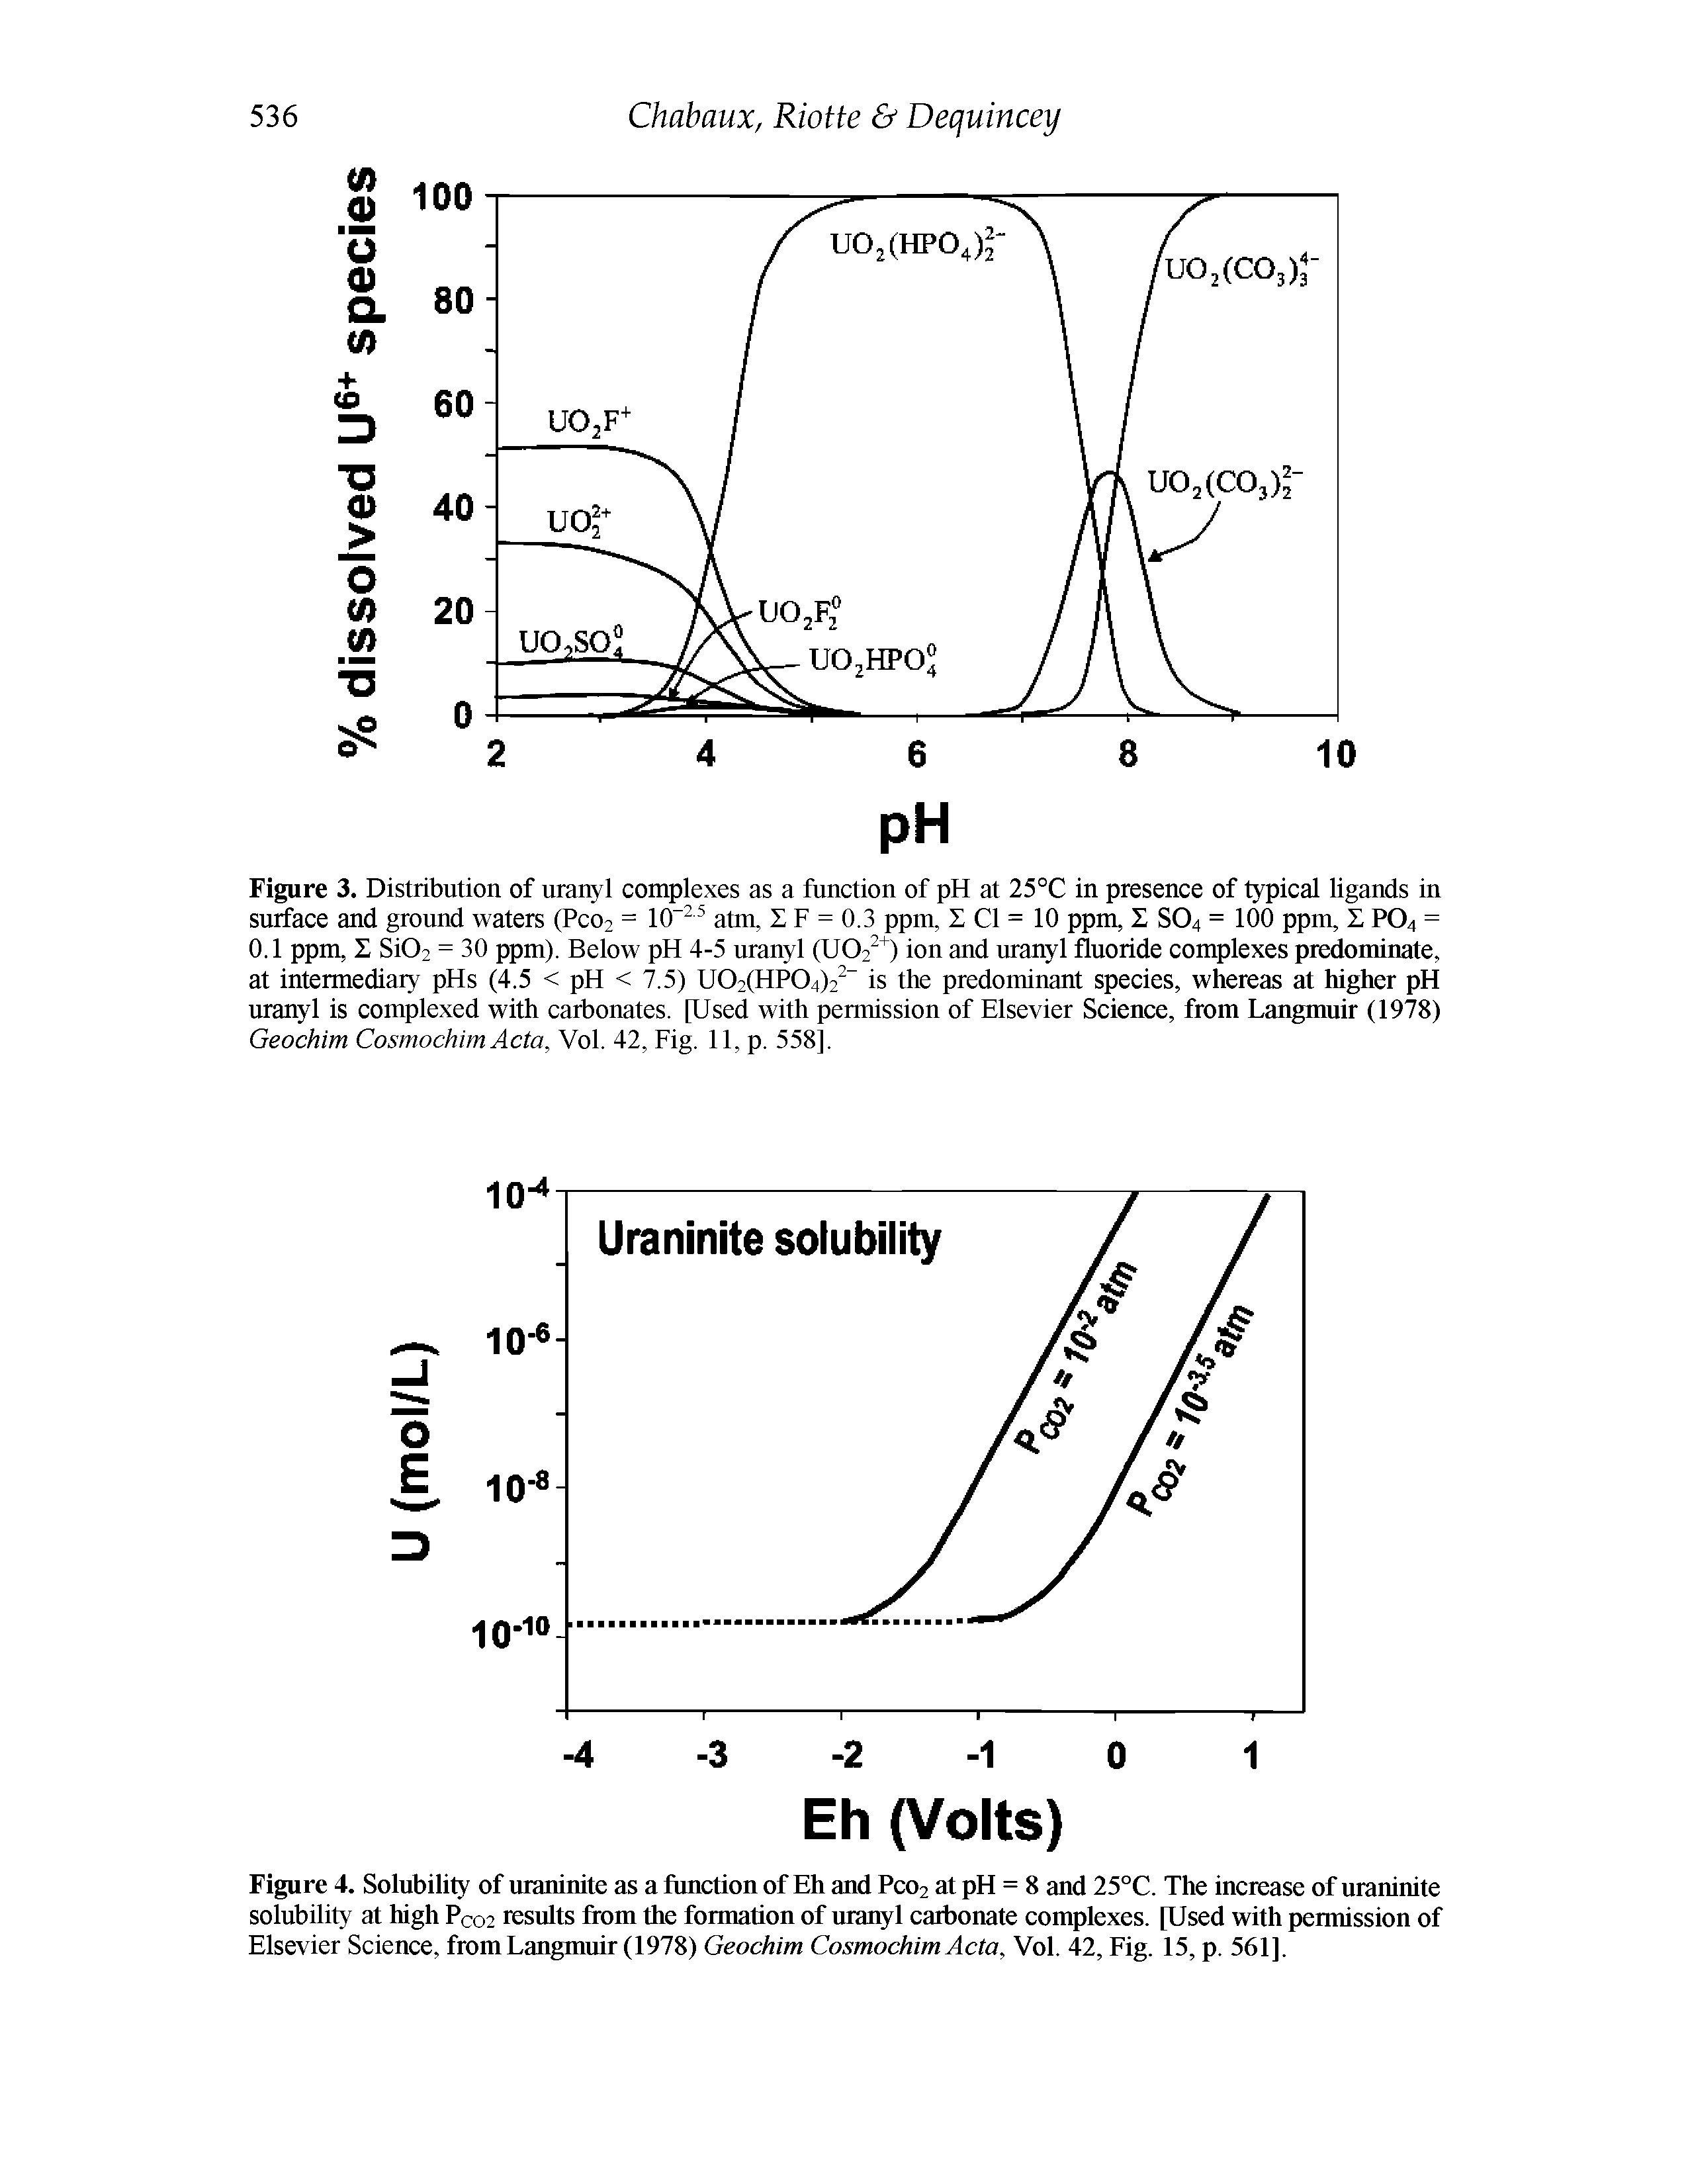 Figure 3. Distribution of uranyl complexes as a function of pH at 25°C in presence of typical ligands in surface and ground waters (PCO2 = 10 atm, E F = 0.3 ppm, E Cl = 10 ppm, E SO4 = 100 ppm, E PO4 = 0.1 ppm, E Si02 = 30 ppm). Below pH 4-5 uranyl (U02 ) ion and uranyl fluoride complexes predominate, at intermediaiy pHs (4.5 < pH < 7.5) U02(HP04)2 is the predominant species, whereas at higher pH uranyl is complexed with carbonates. [Used with permission of Elsevier Science, from Langmuir (1978) Geochim Cosmochim Acta, Vol. 42, Fig. 11, p. 558].